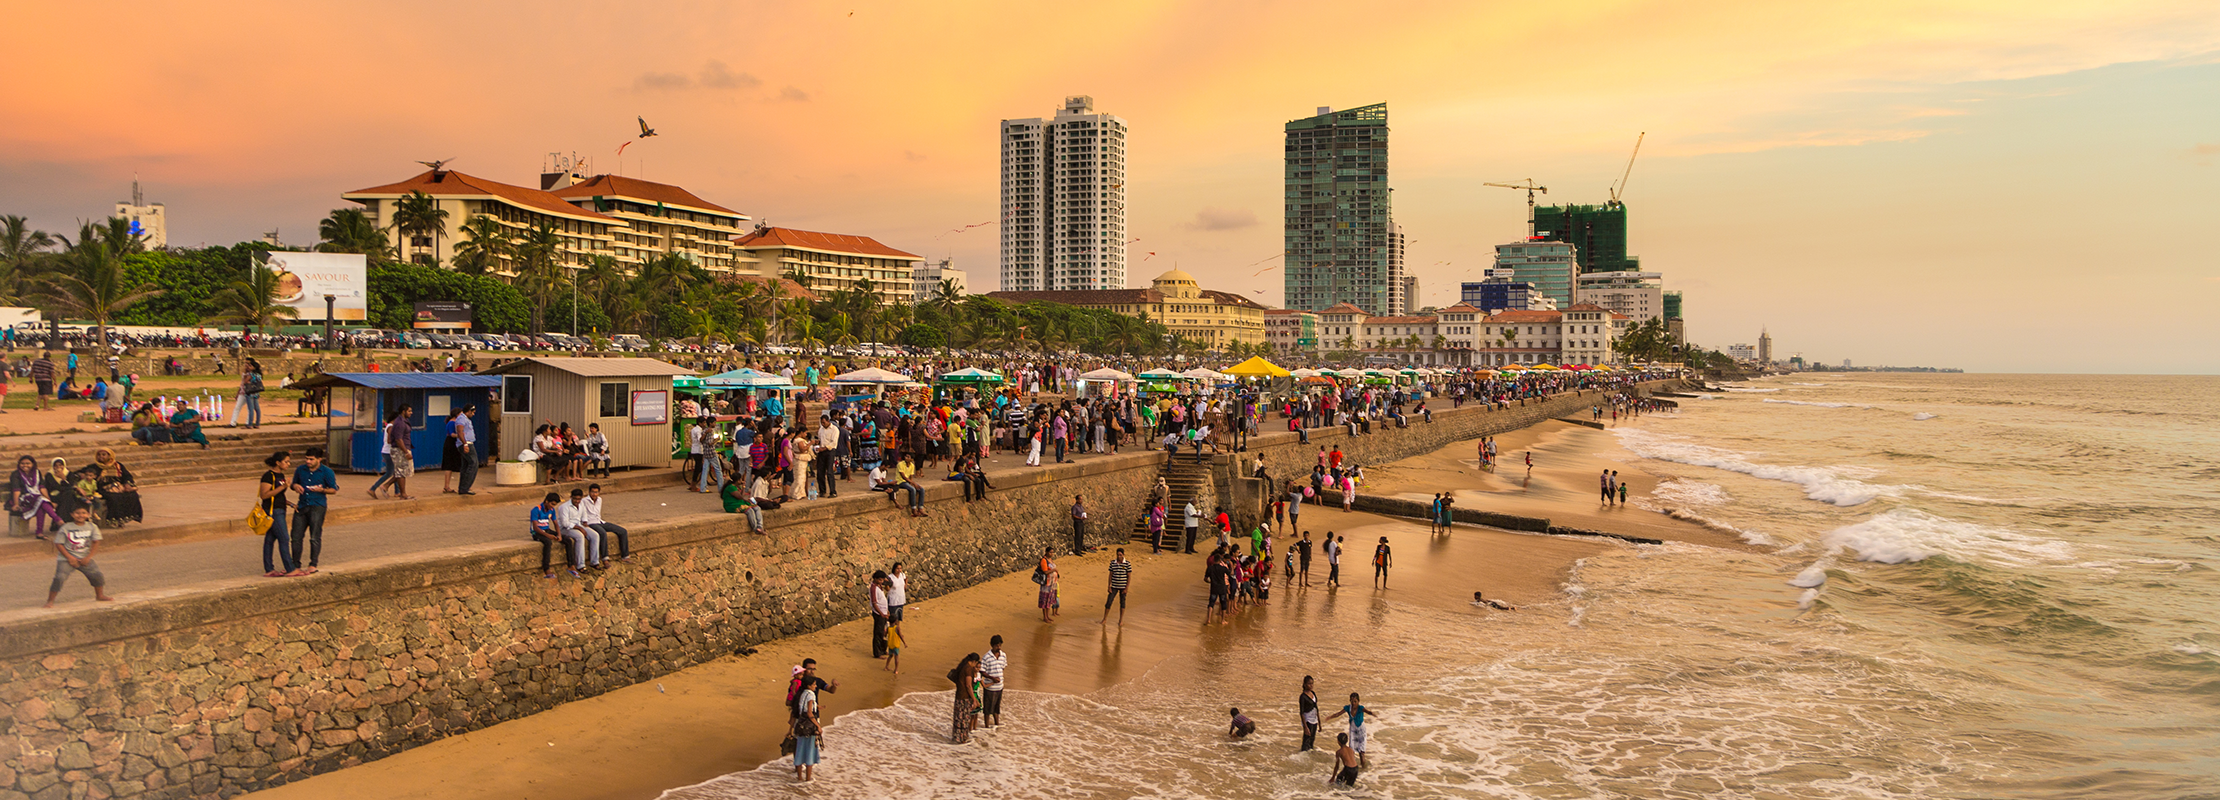 colombo-attractions2